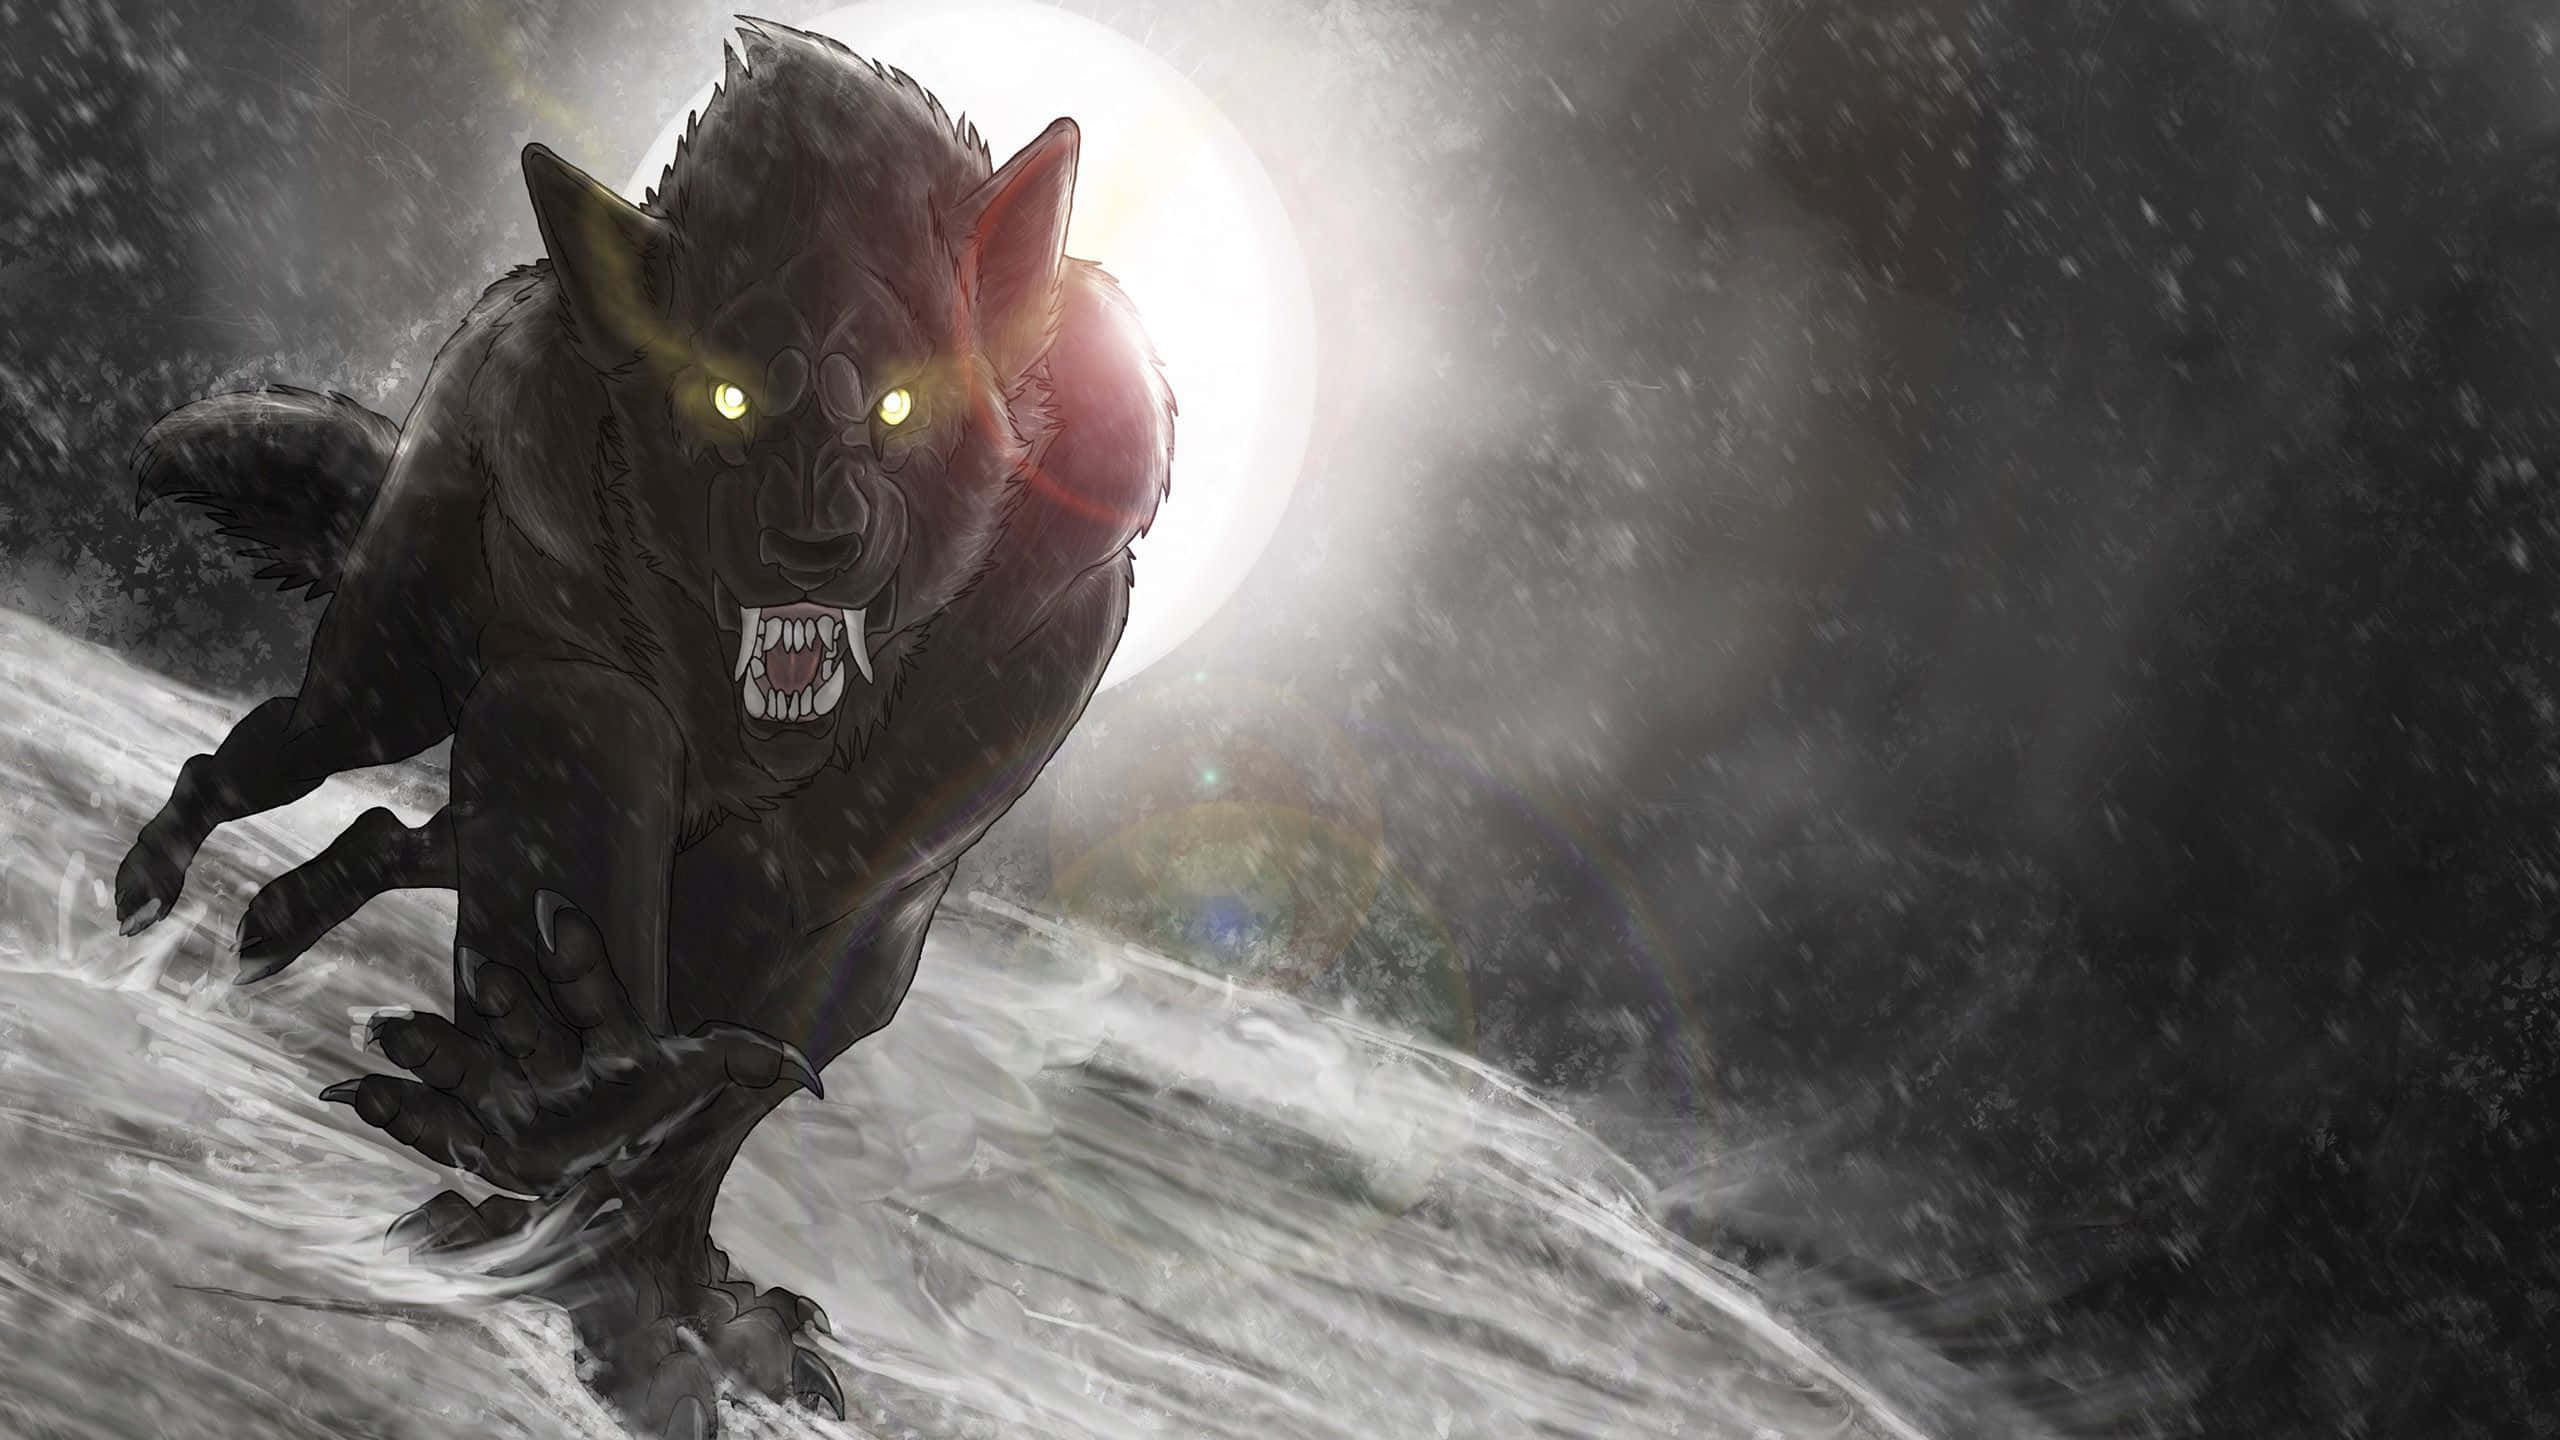 "Sheer terror in the face of the Werewolf"